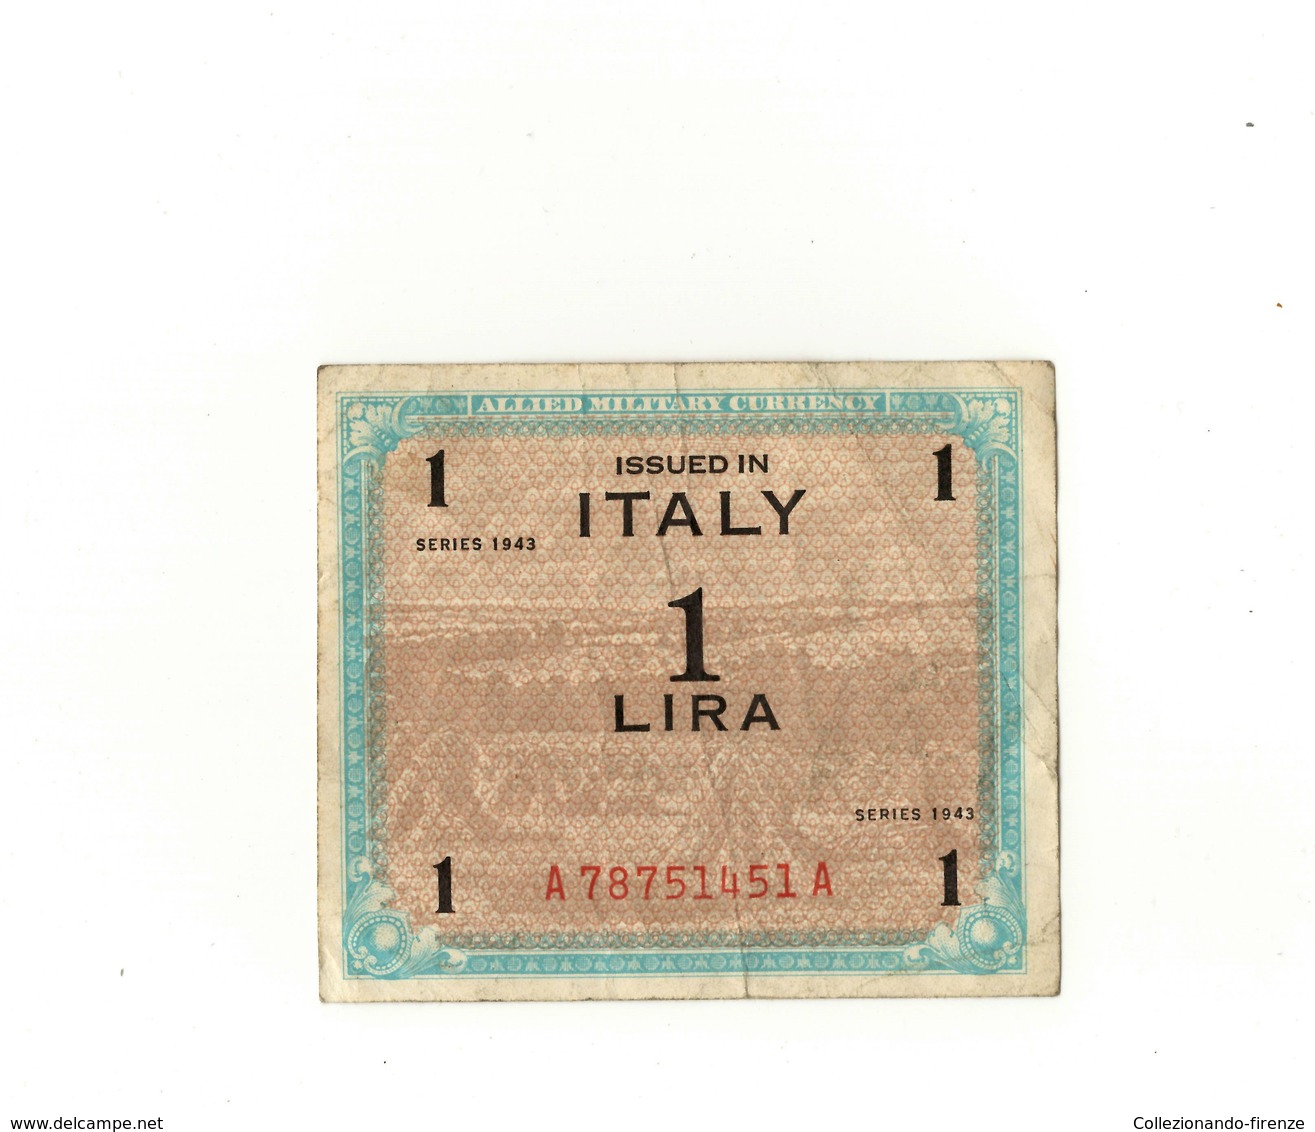 1 Lira Issued In Italy  - Allied Military Currency - Kiloware - Banknoten